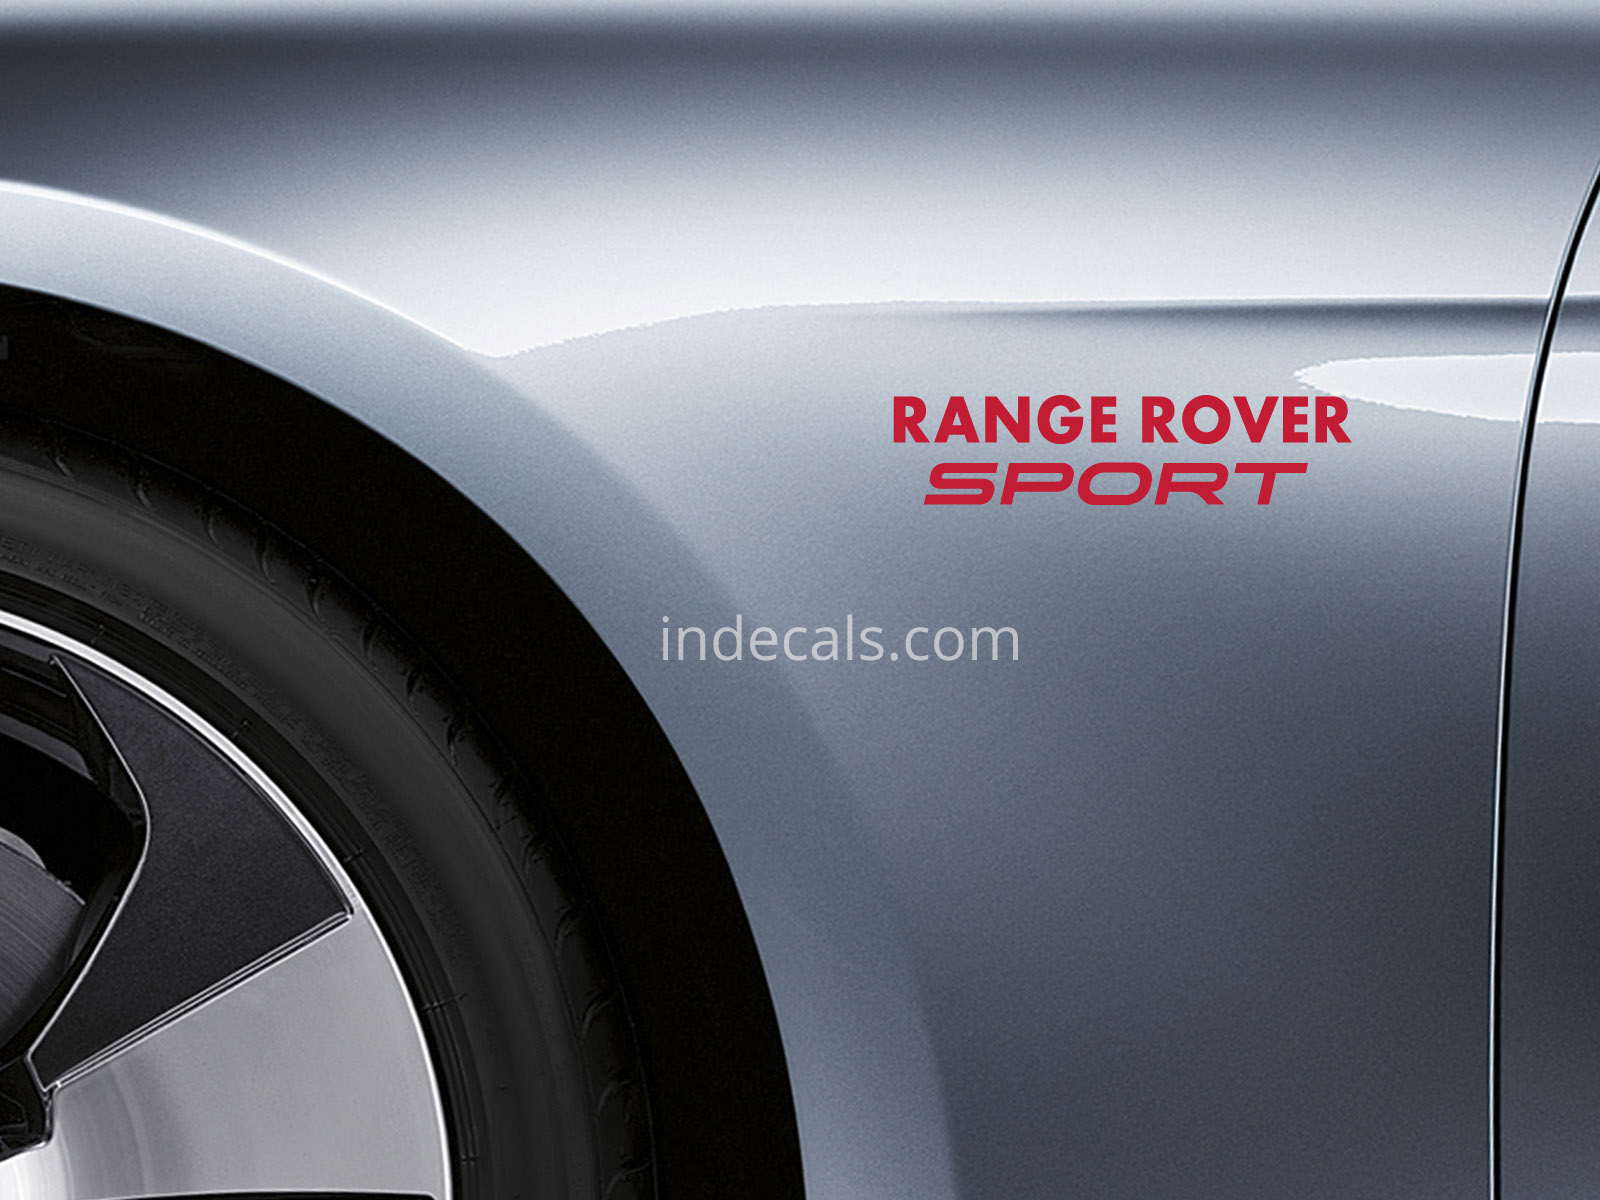 2 x Range Rover Sports stickers for Wings - Red